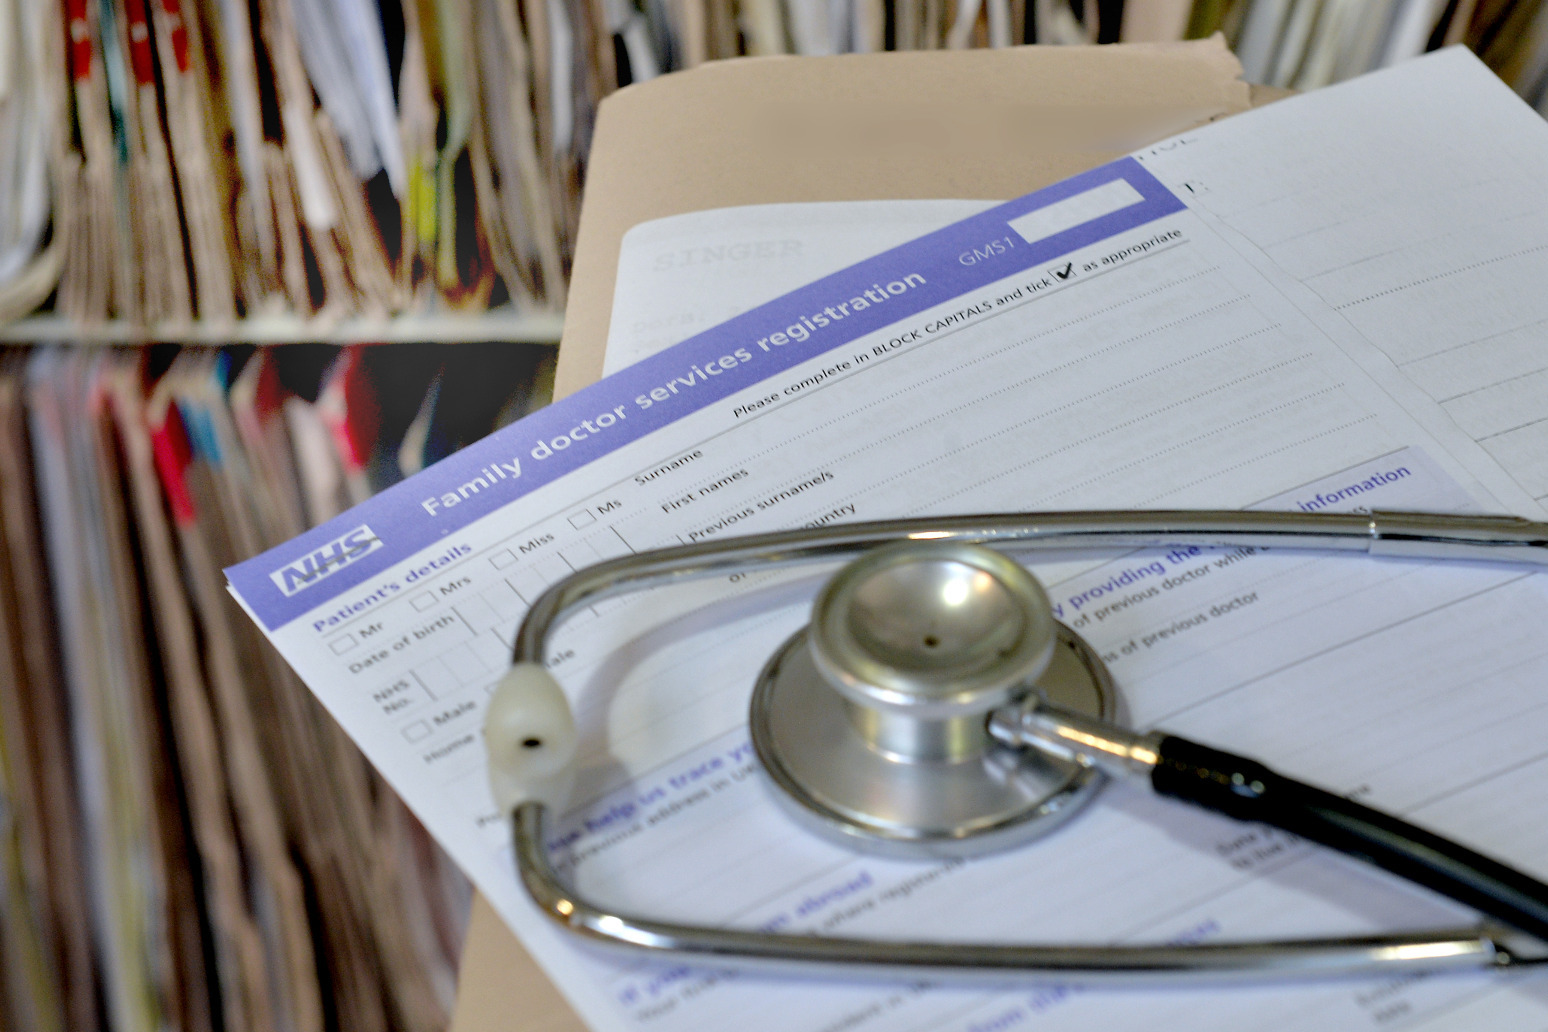 Help needed to back quality care for patients amid GP workloads 